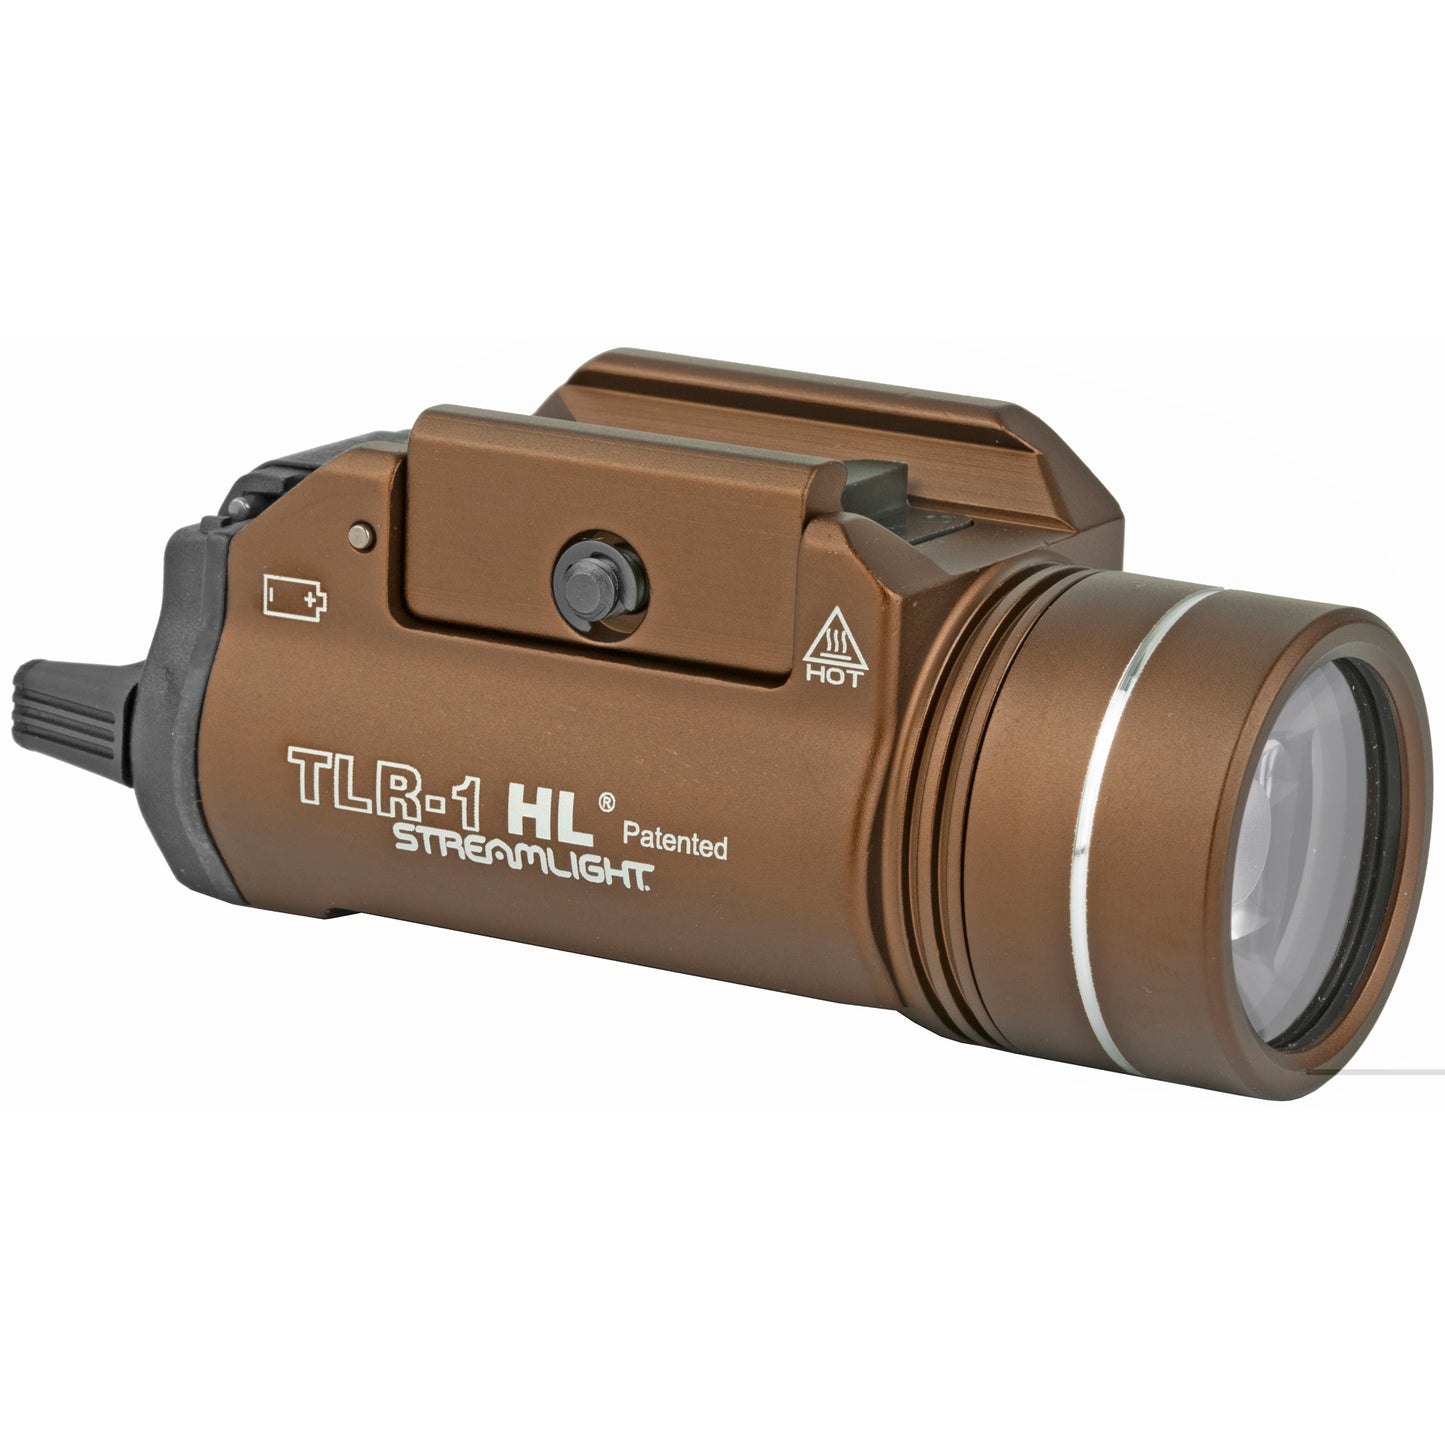 Streamlight, TLR-1 HL, High Lumen Rail Mounted Tactical Light, Pistol and Picatinny, FDE Brown, C4 LED 1000 Lumens With Strobe, 2x CR123 Batteries